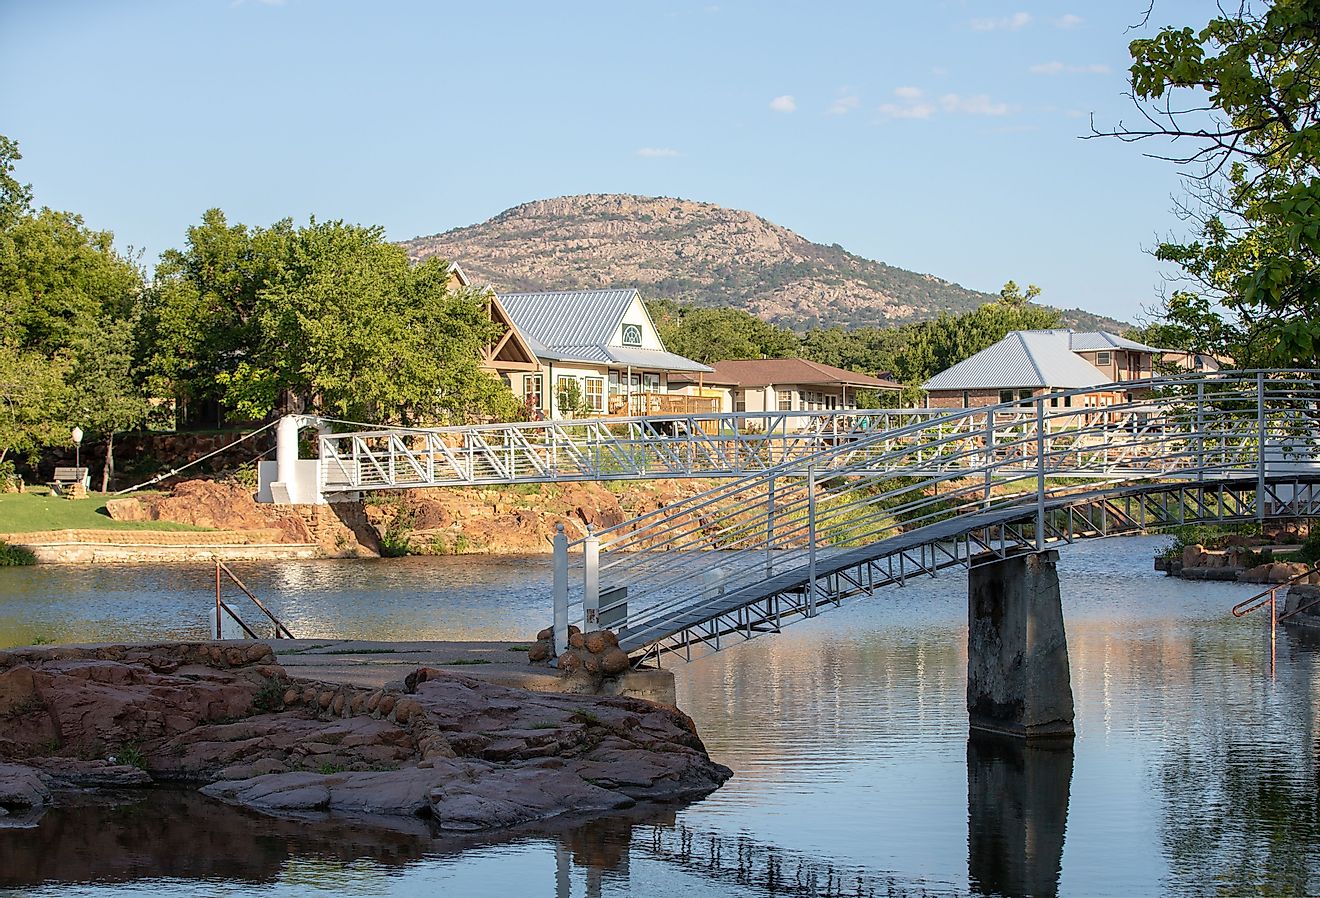 Metal bridge over water and mountain in the background in Medicine Park, Lawton, Oklahoma.